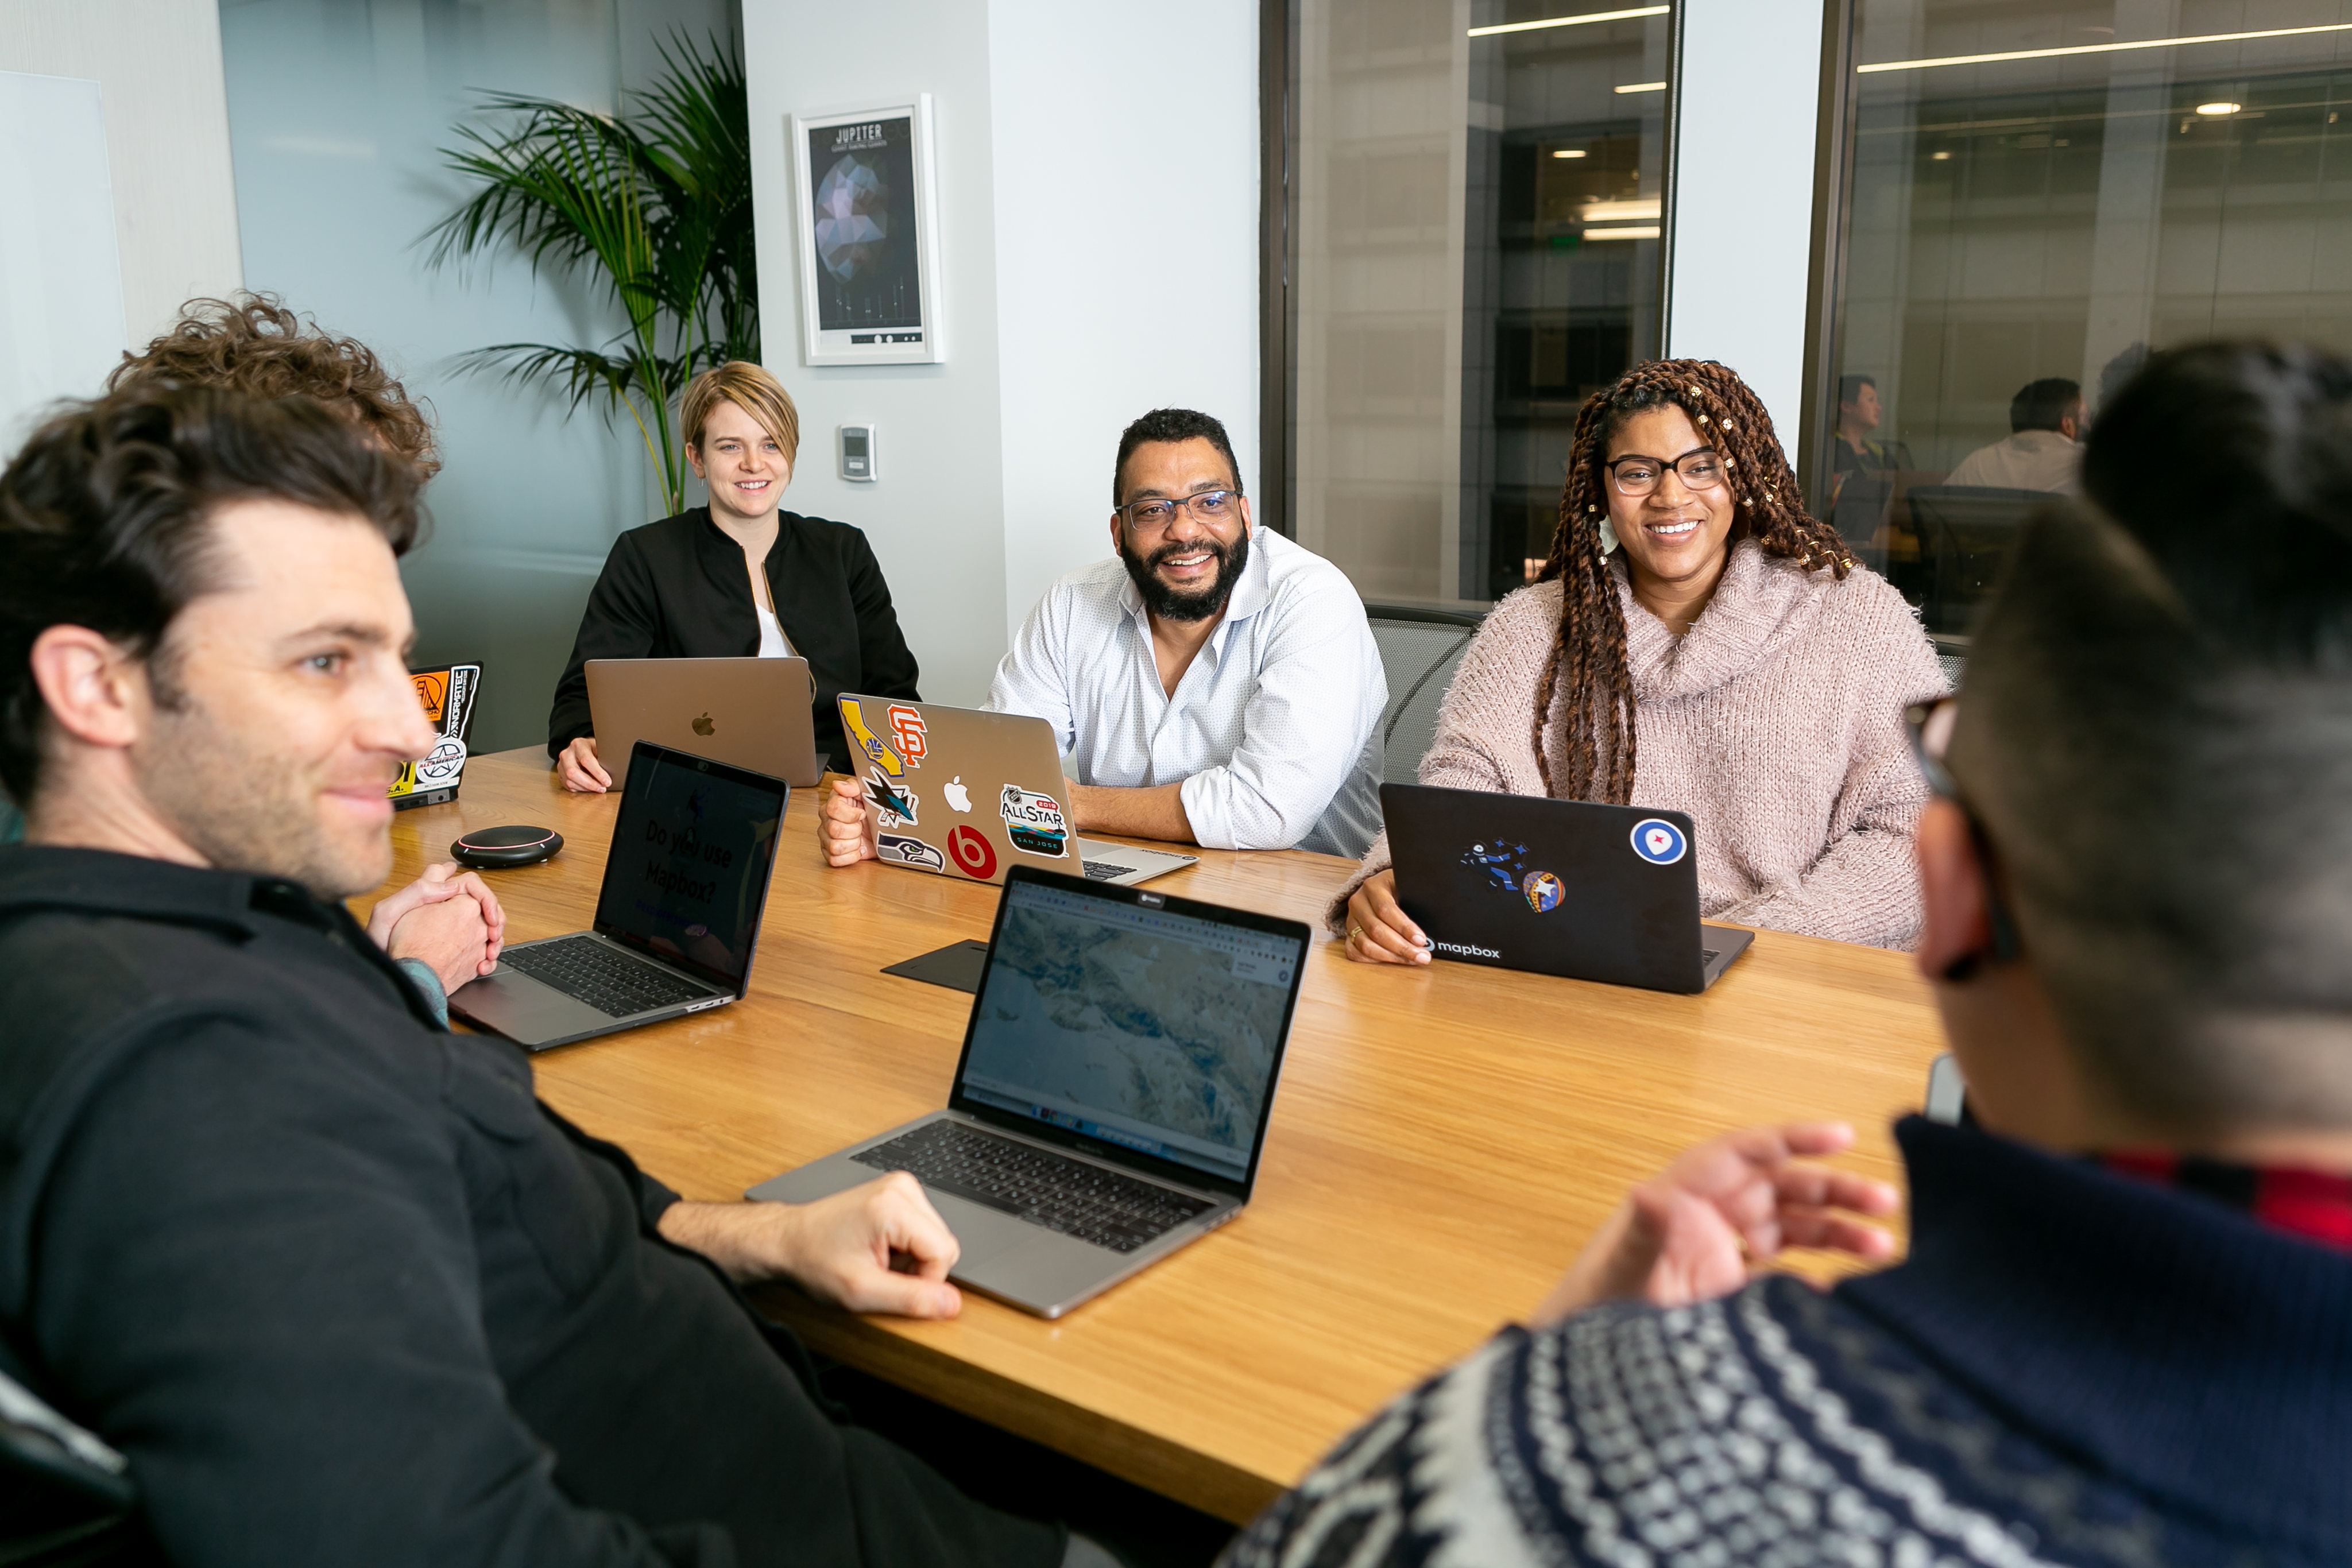 group of smiling people in a meeting